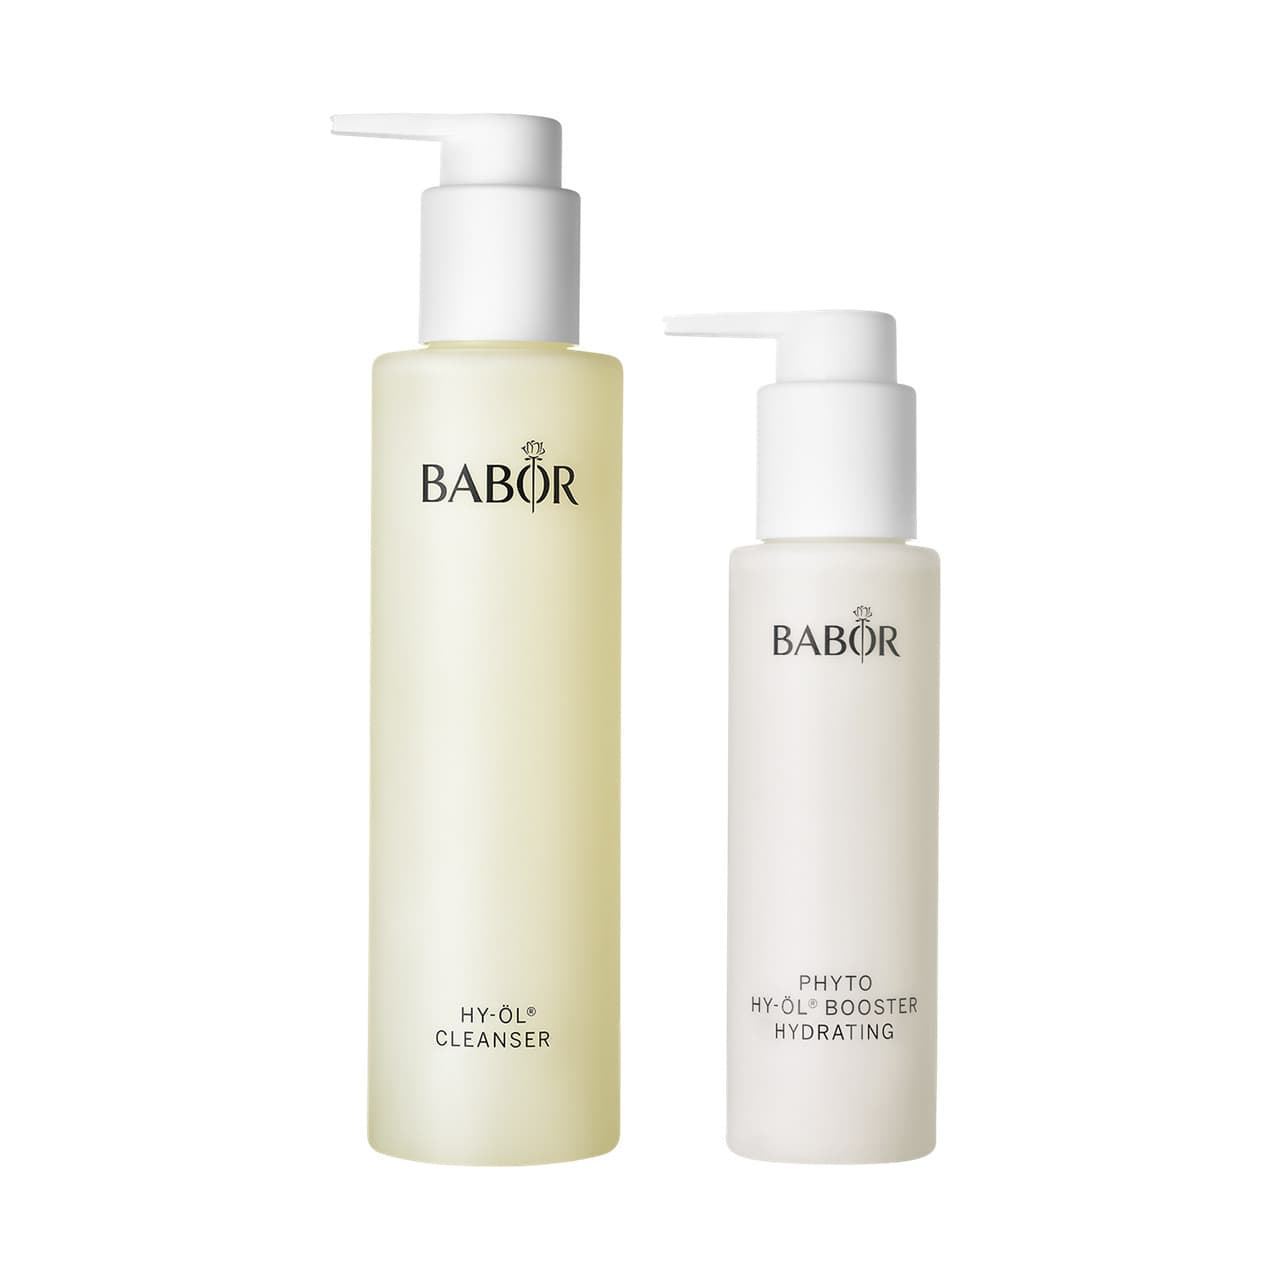 BABOR DUO : HY-ÖL CLEANSER & PHYTO HY-ÖL BOOSTER HYDRATING SET - Imagen 1